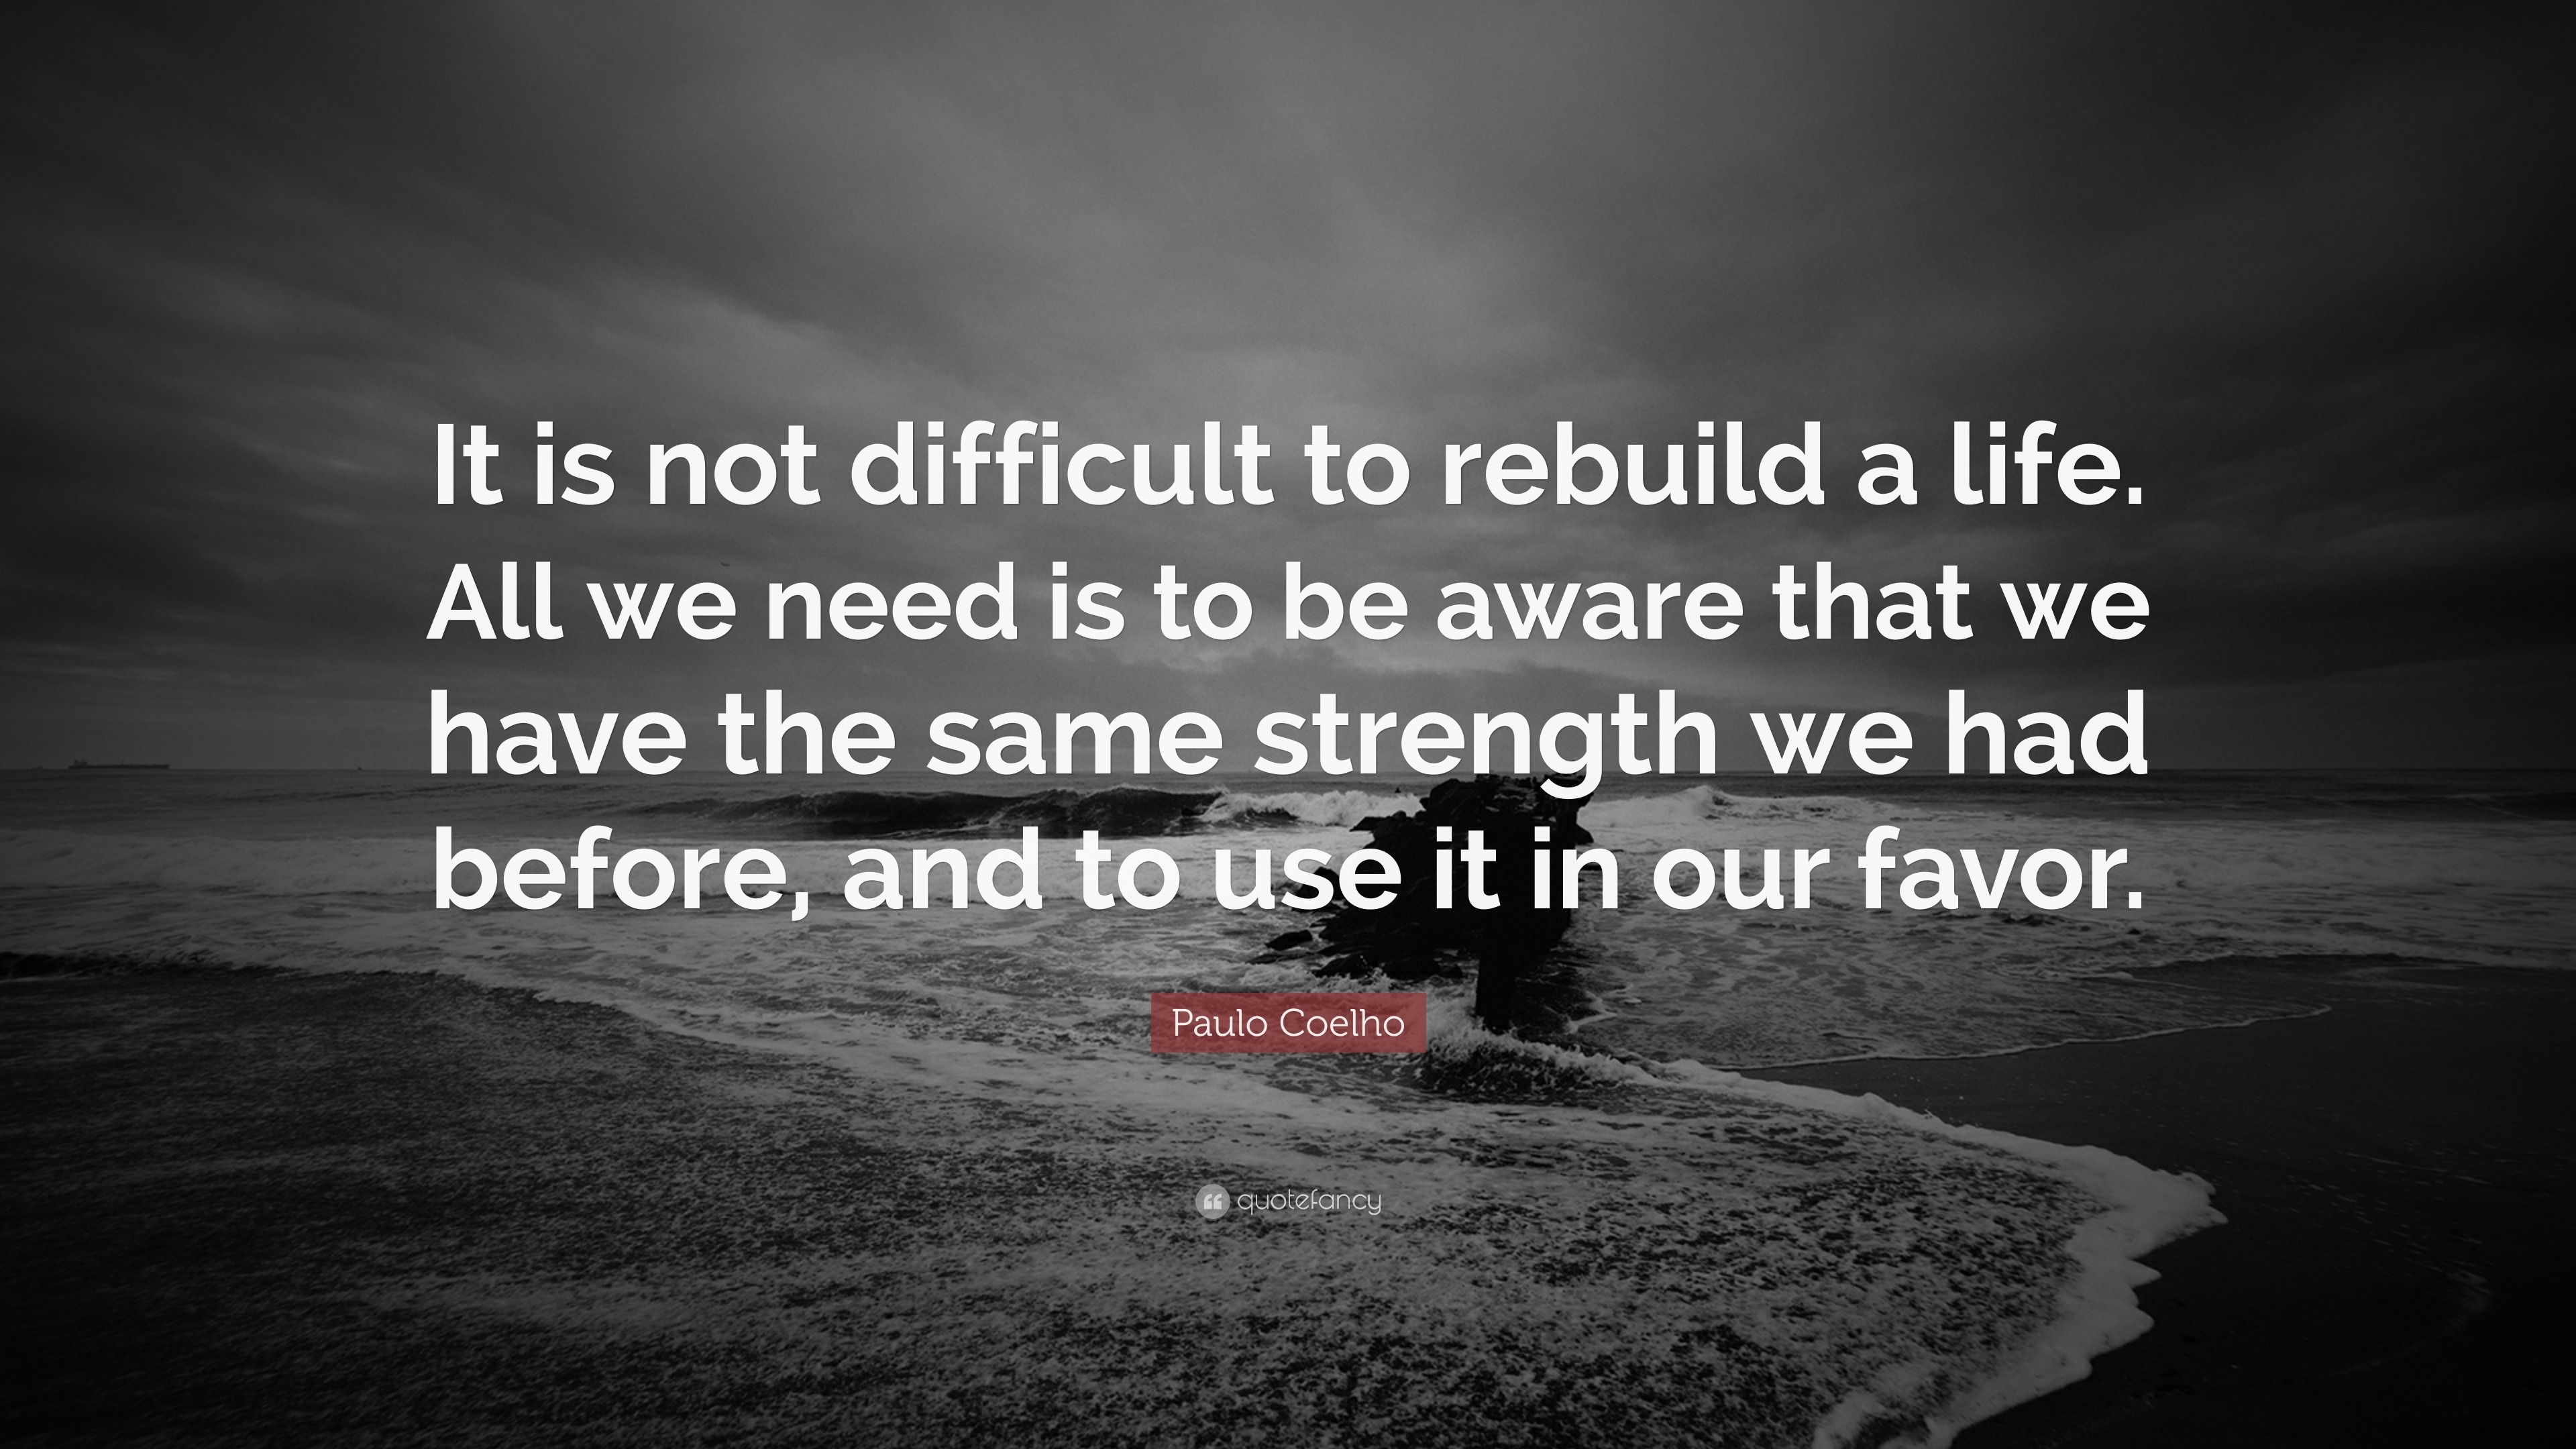 Paulo Coelho Quote: “It is not difficult to rebuild a life. All we need ...